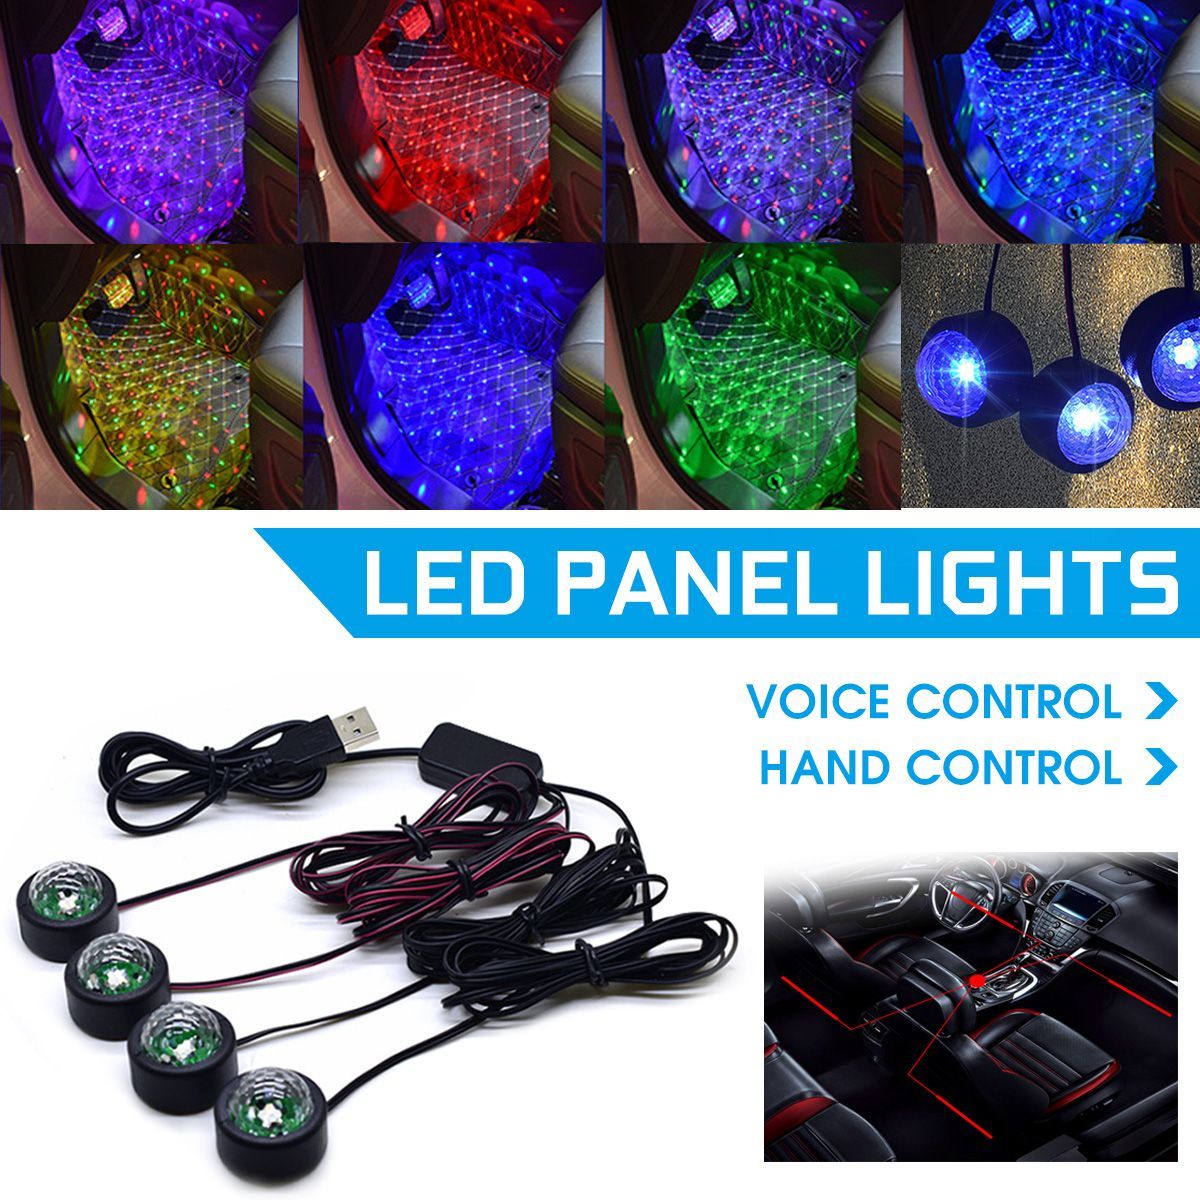 LED-Atmosphere-Lamp-USB-Power-Soles-Colorful-Sound-activatedHand-Control-Breathing-Starry-1688861